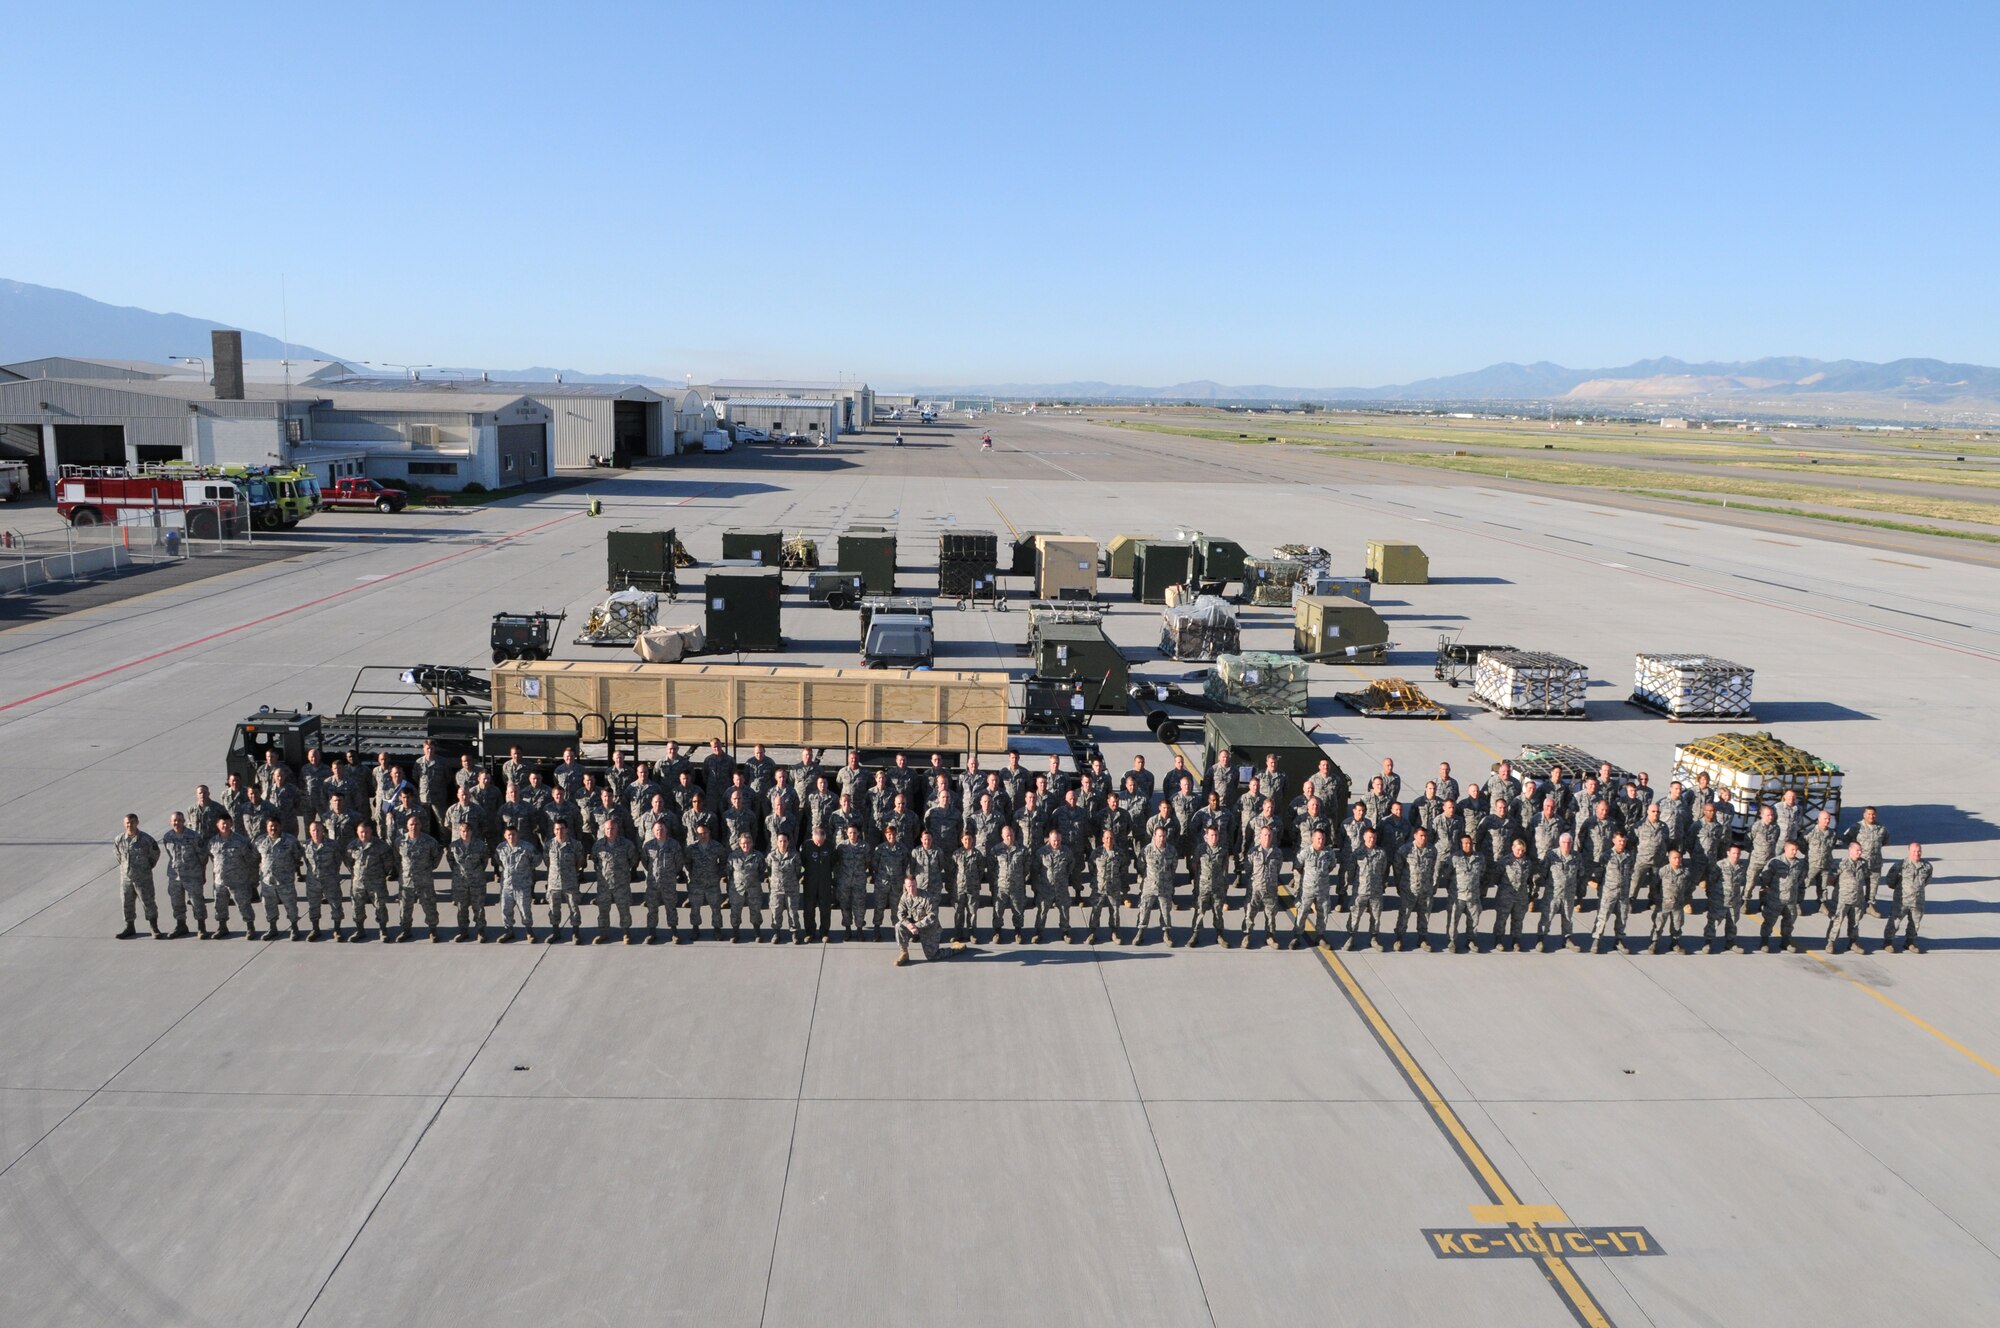 More than 160 Airmen and 100 short tons of cargo are positioned on the Utah Air National Guard Base flightline August 7 as part of Exercise Double Whammy.  The exercise tested the wing's ability to process and deploy personnel and cargo in the event of an attack on the homeland.  (U.S. Air Force photo by TSgt. Kelly Collett)